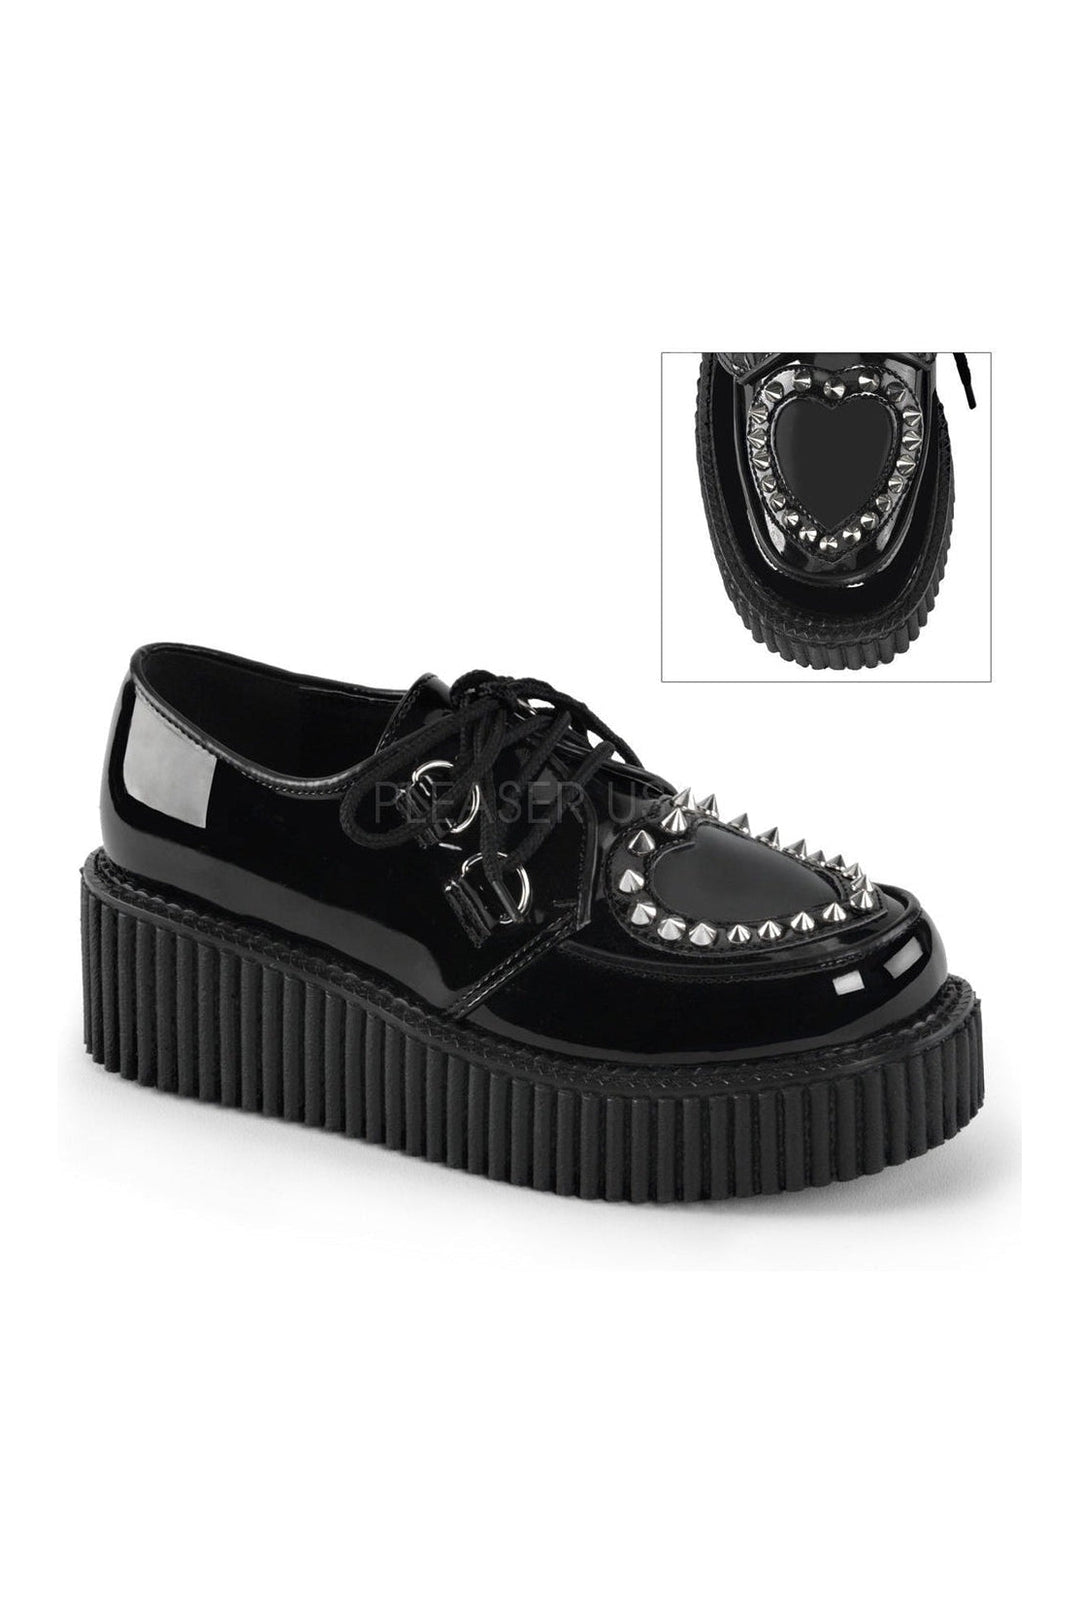 Demonia | CREEPER-108 Gothic Shoe | | Available online | SexyShoes.com –